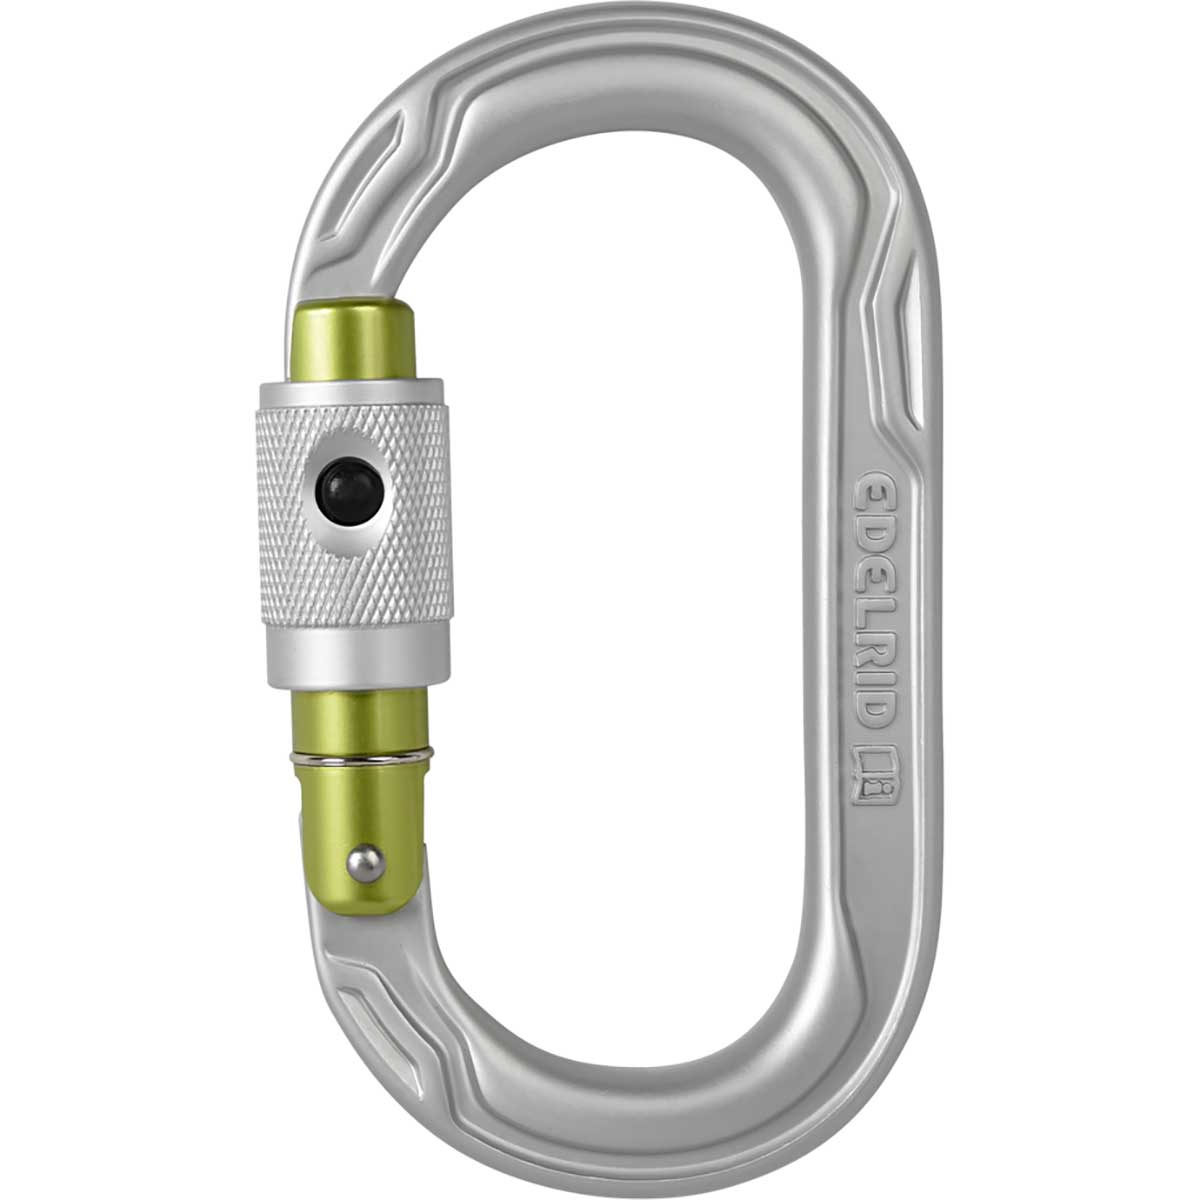 Image of Edelrid Moschettone Oval Power 2500 Permalock